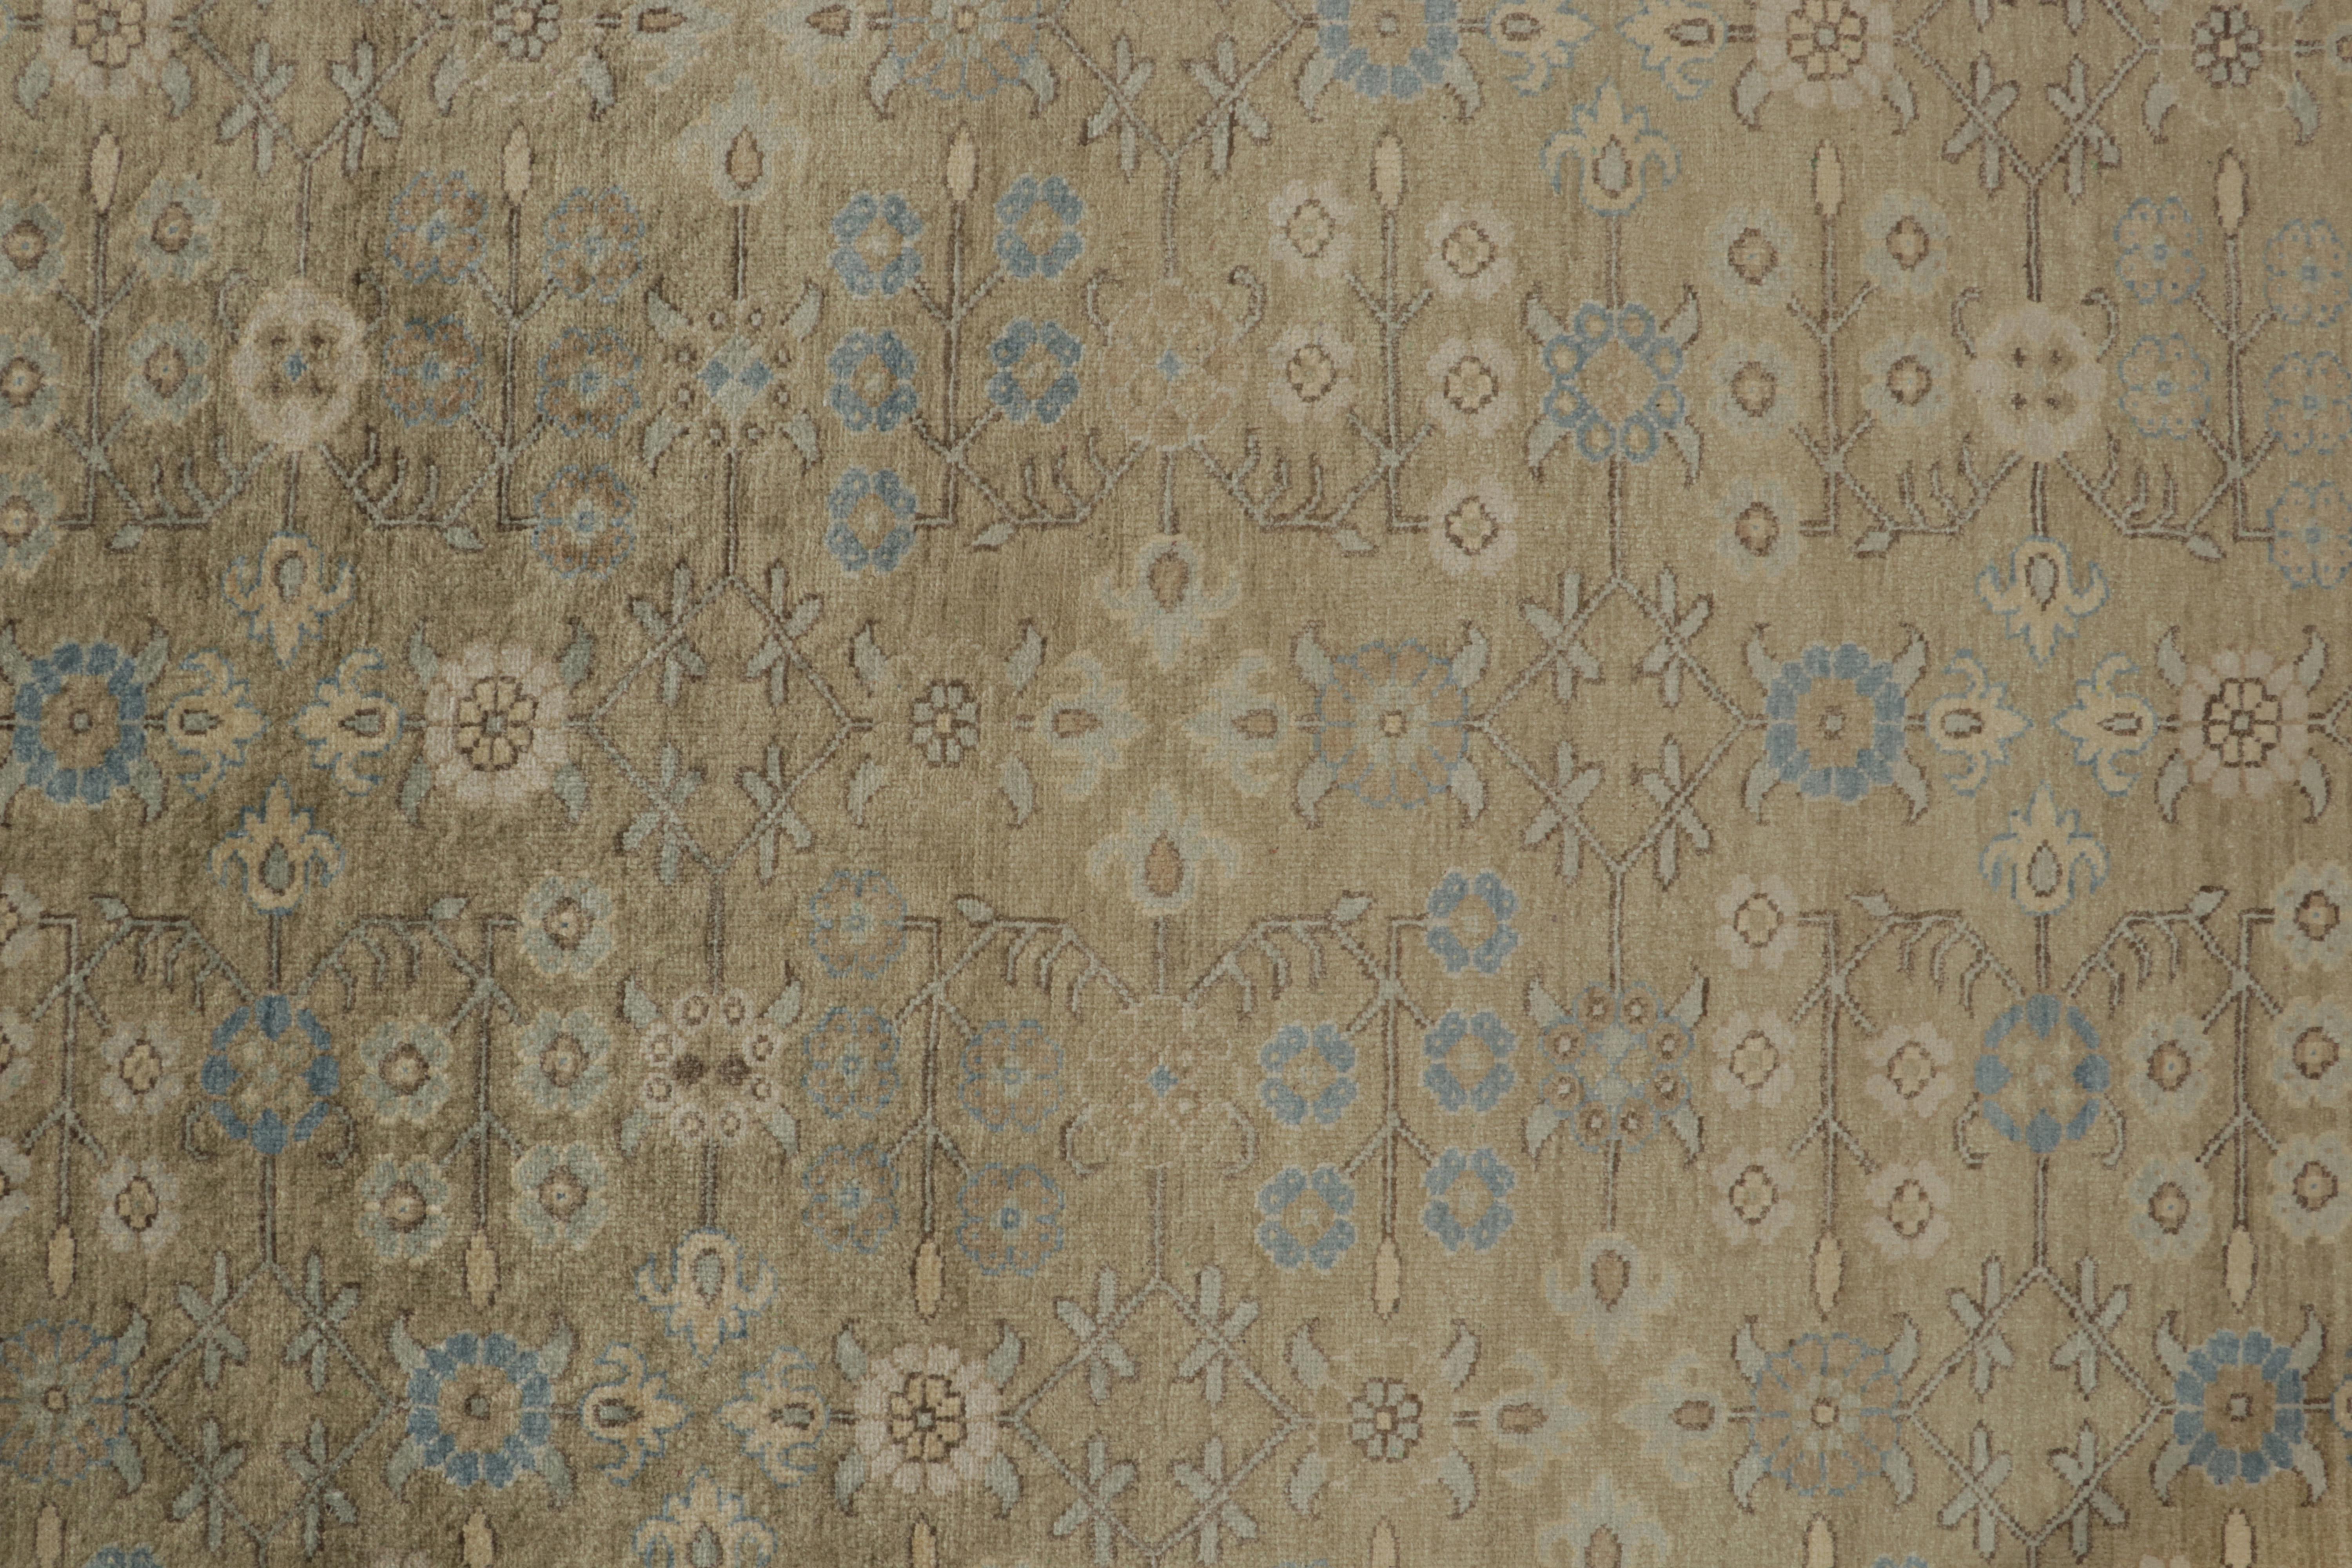 Contemporary Rug & Kilim’s Khotan Style Rug in Gold, Beige-Brown and Blue Patterns For Sale